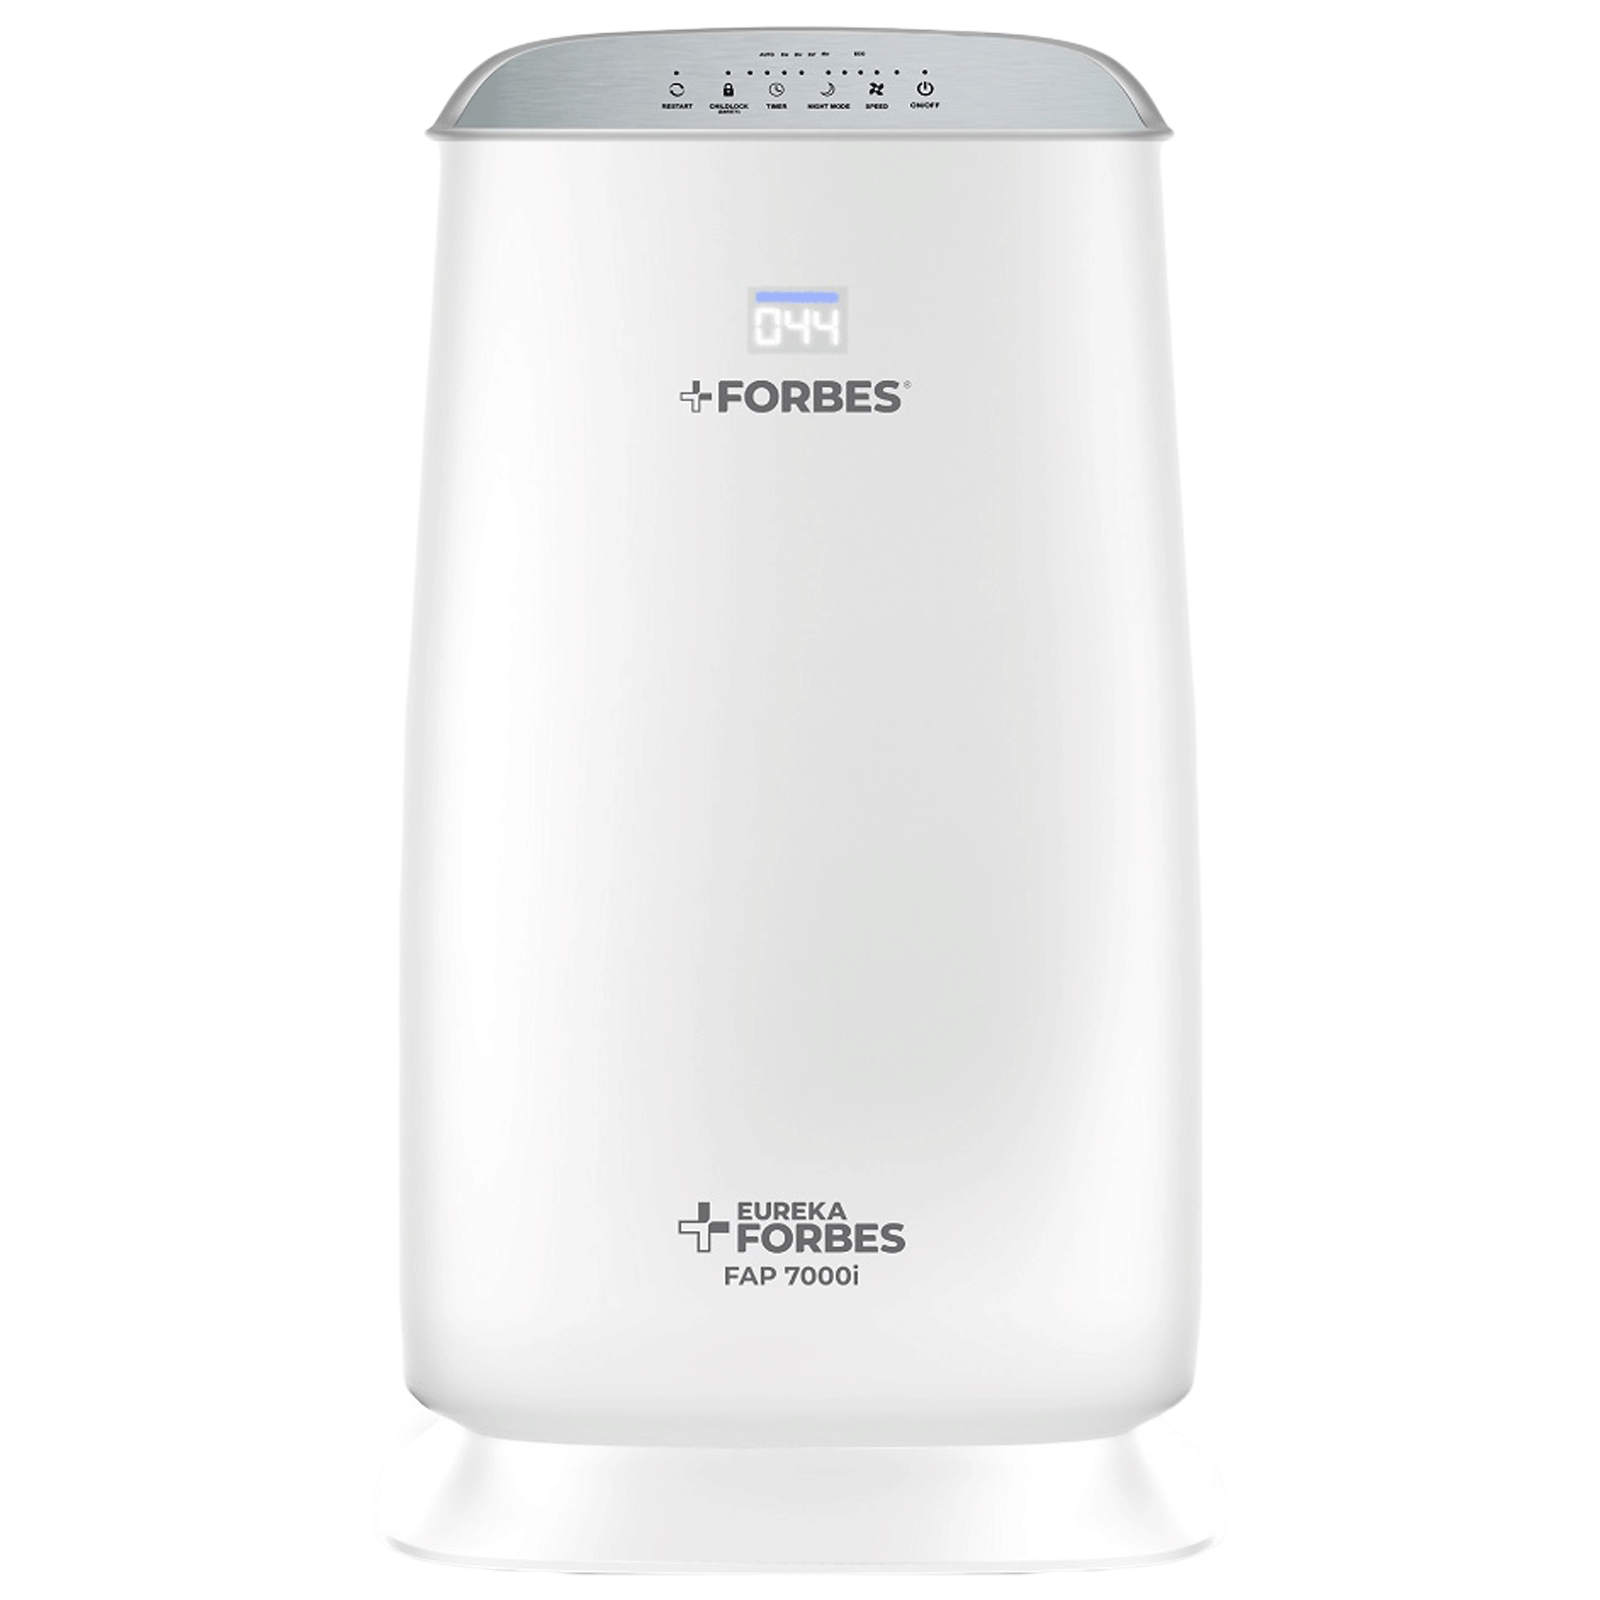 Eureka Forbes - Eureka Forbes 4 Stages of Purification Technology Air Purifier (Advanced HEPA -11 Filters, FAP 7000i, White)